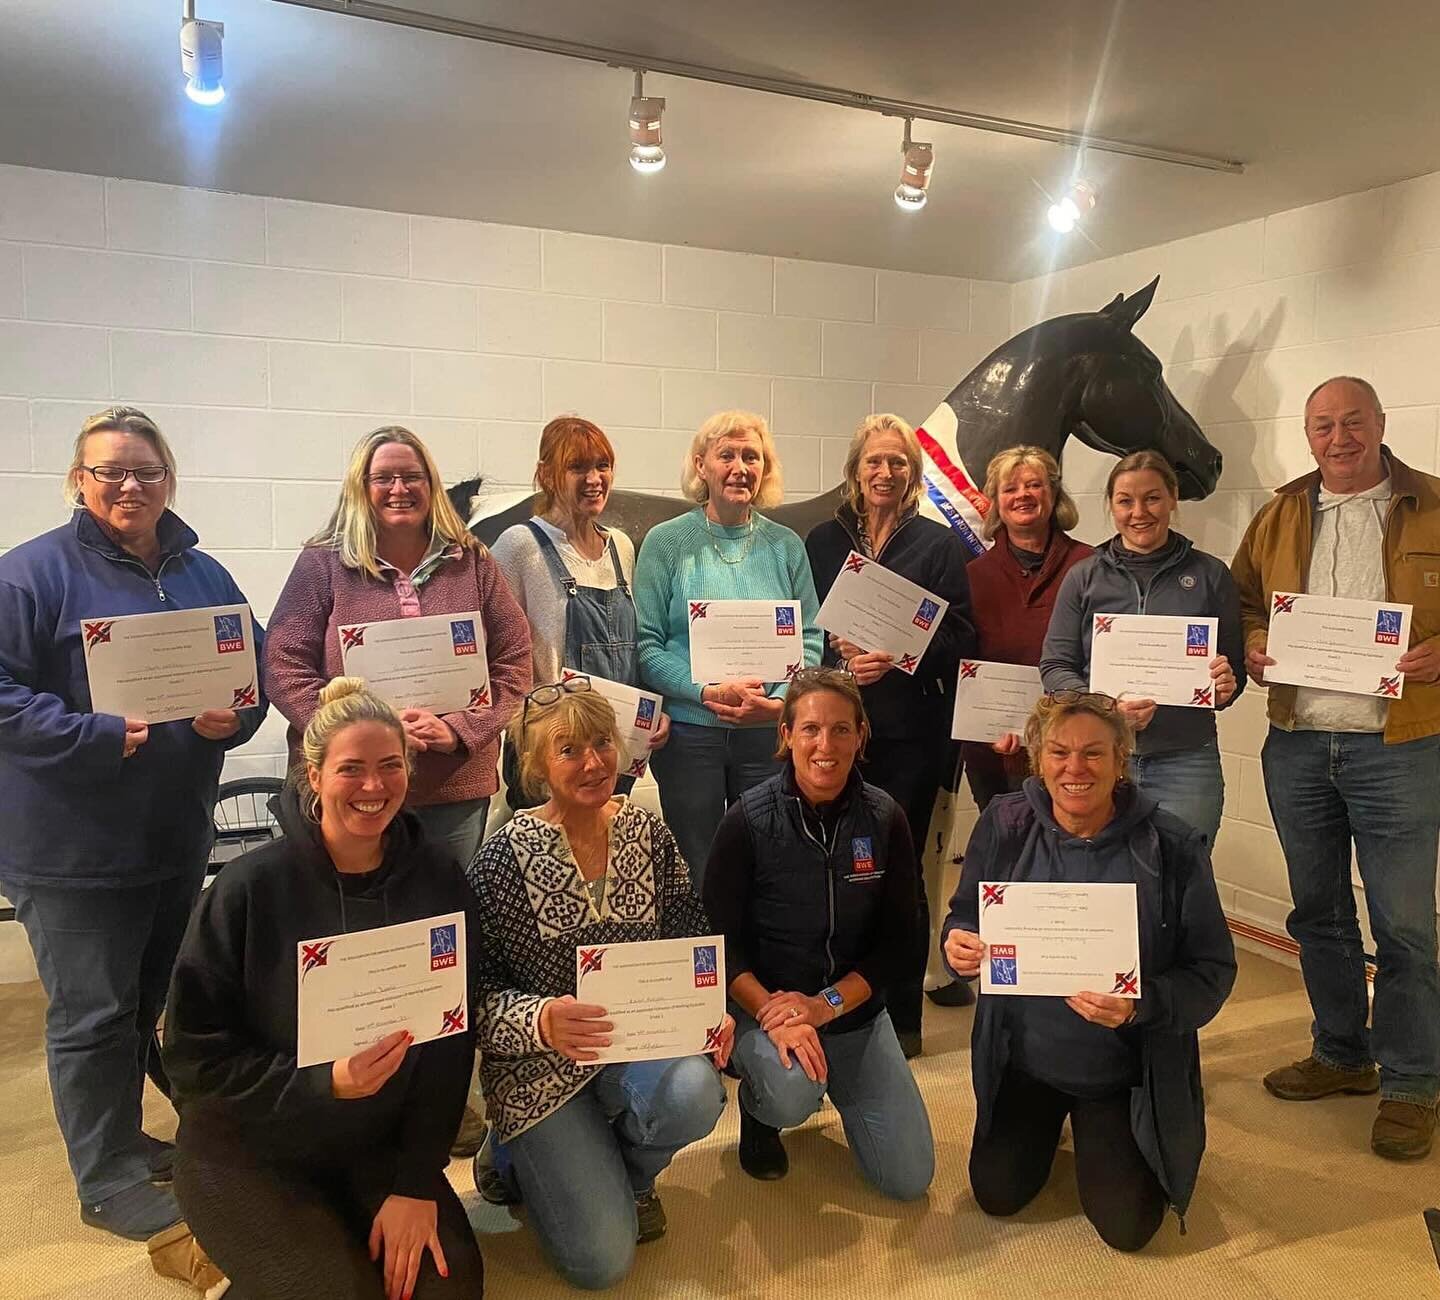 We had a great few days @abweofficial 

 We are now all Approved Instructors for Working Equitation

I can&rsquo;t wait to get going! 

I have had a great equestrian journey so far hunting, point to point, eventing and then finding my passion for com